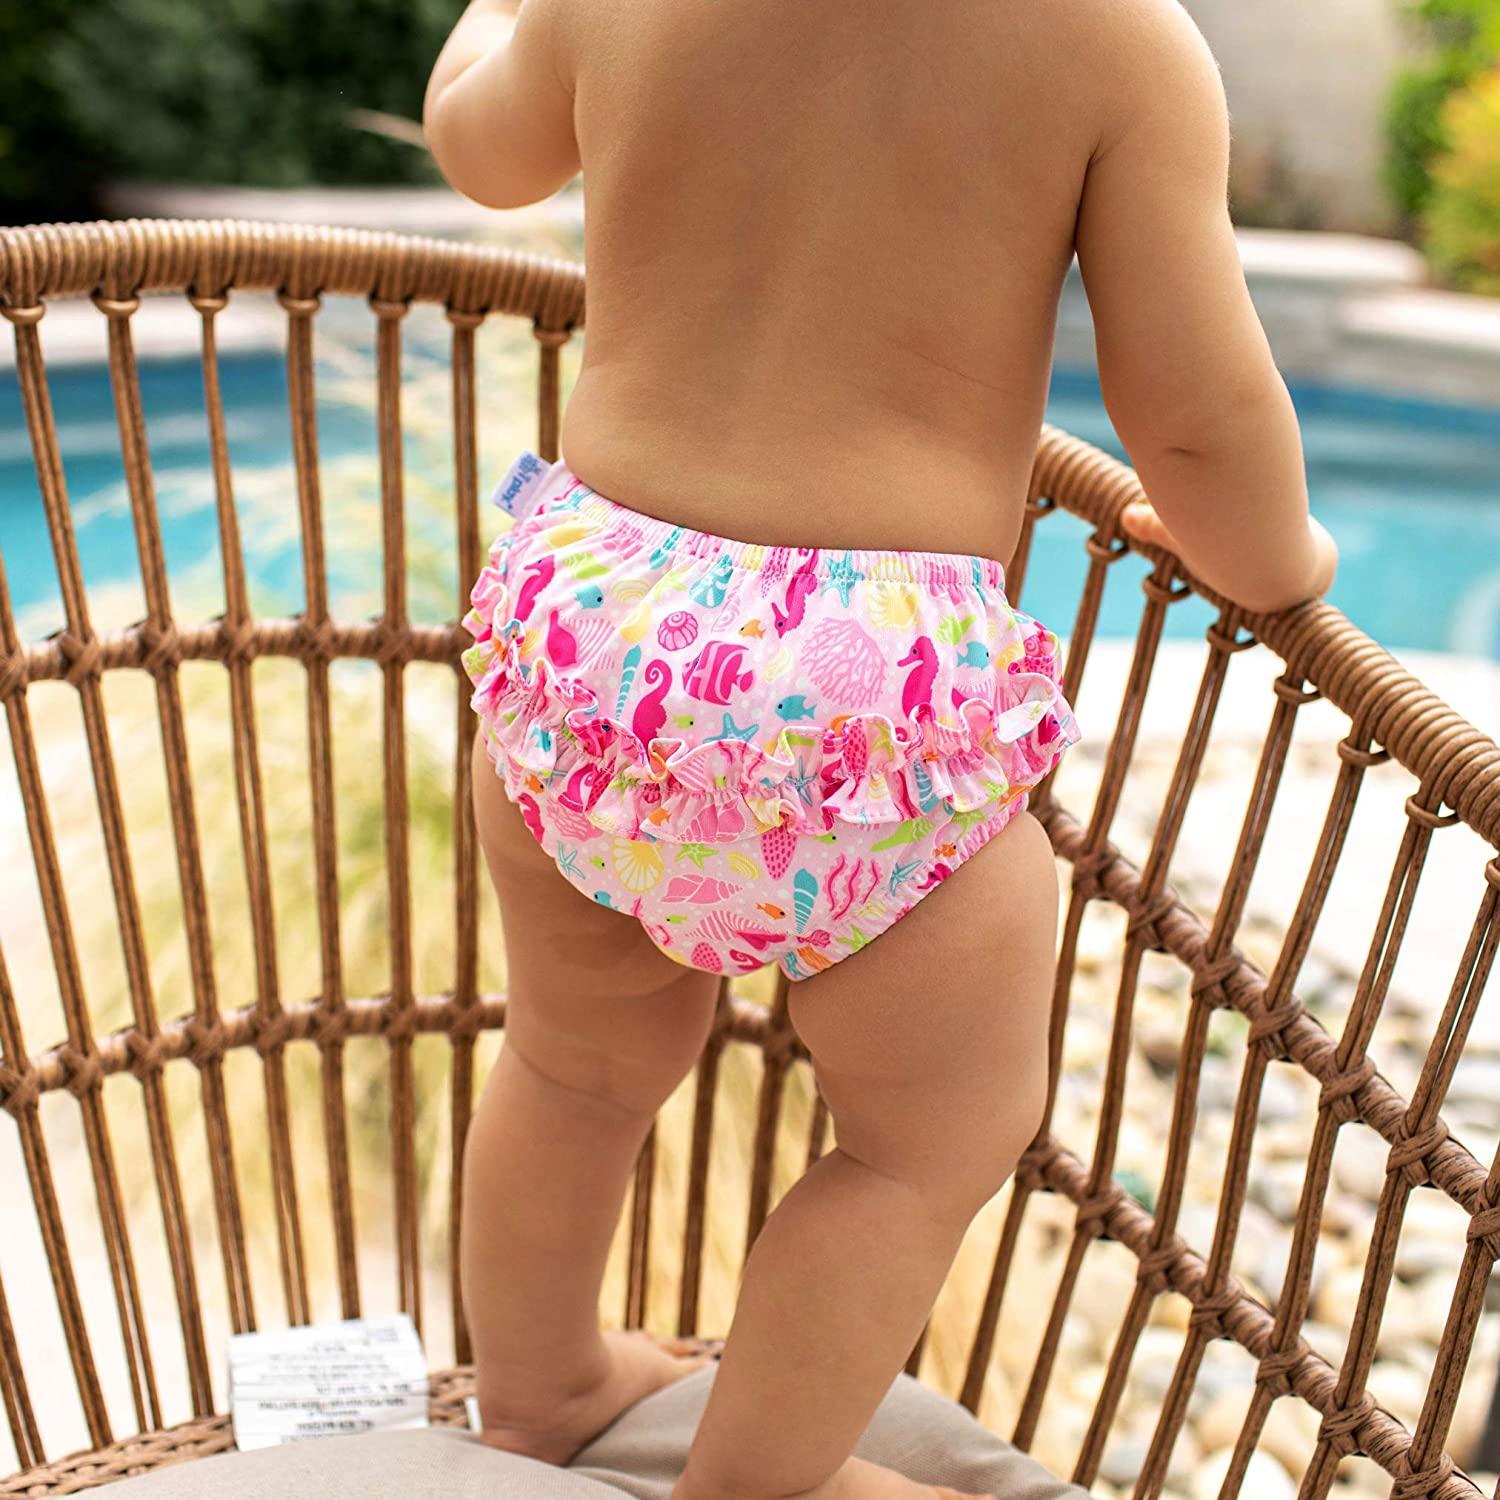 Solid Color Reusable Swim Diaper  Adjustable for Kids Ages 0 - 12 y/o